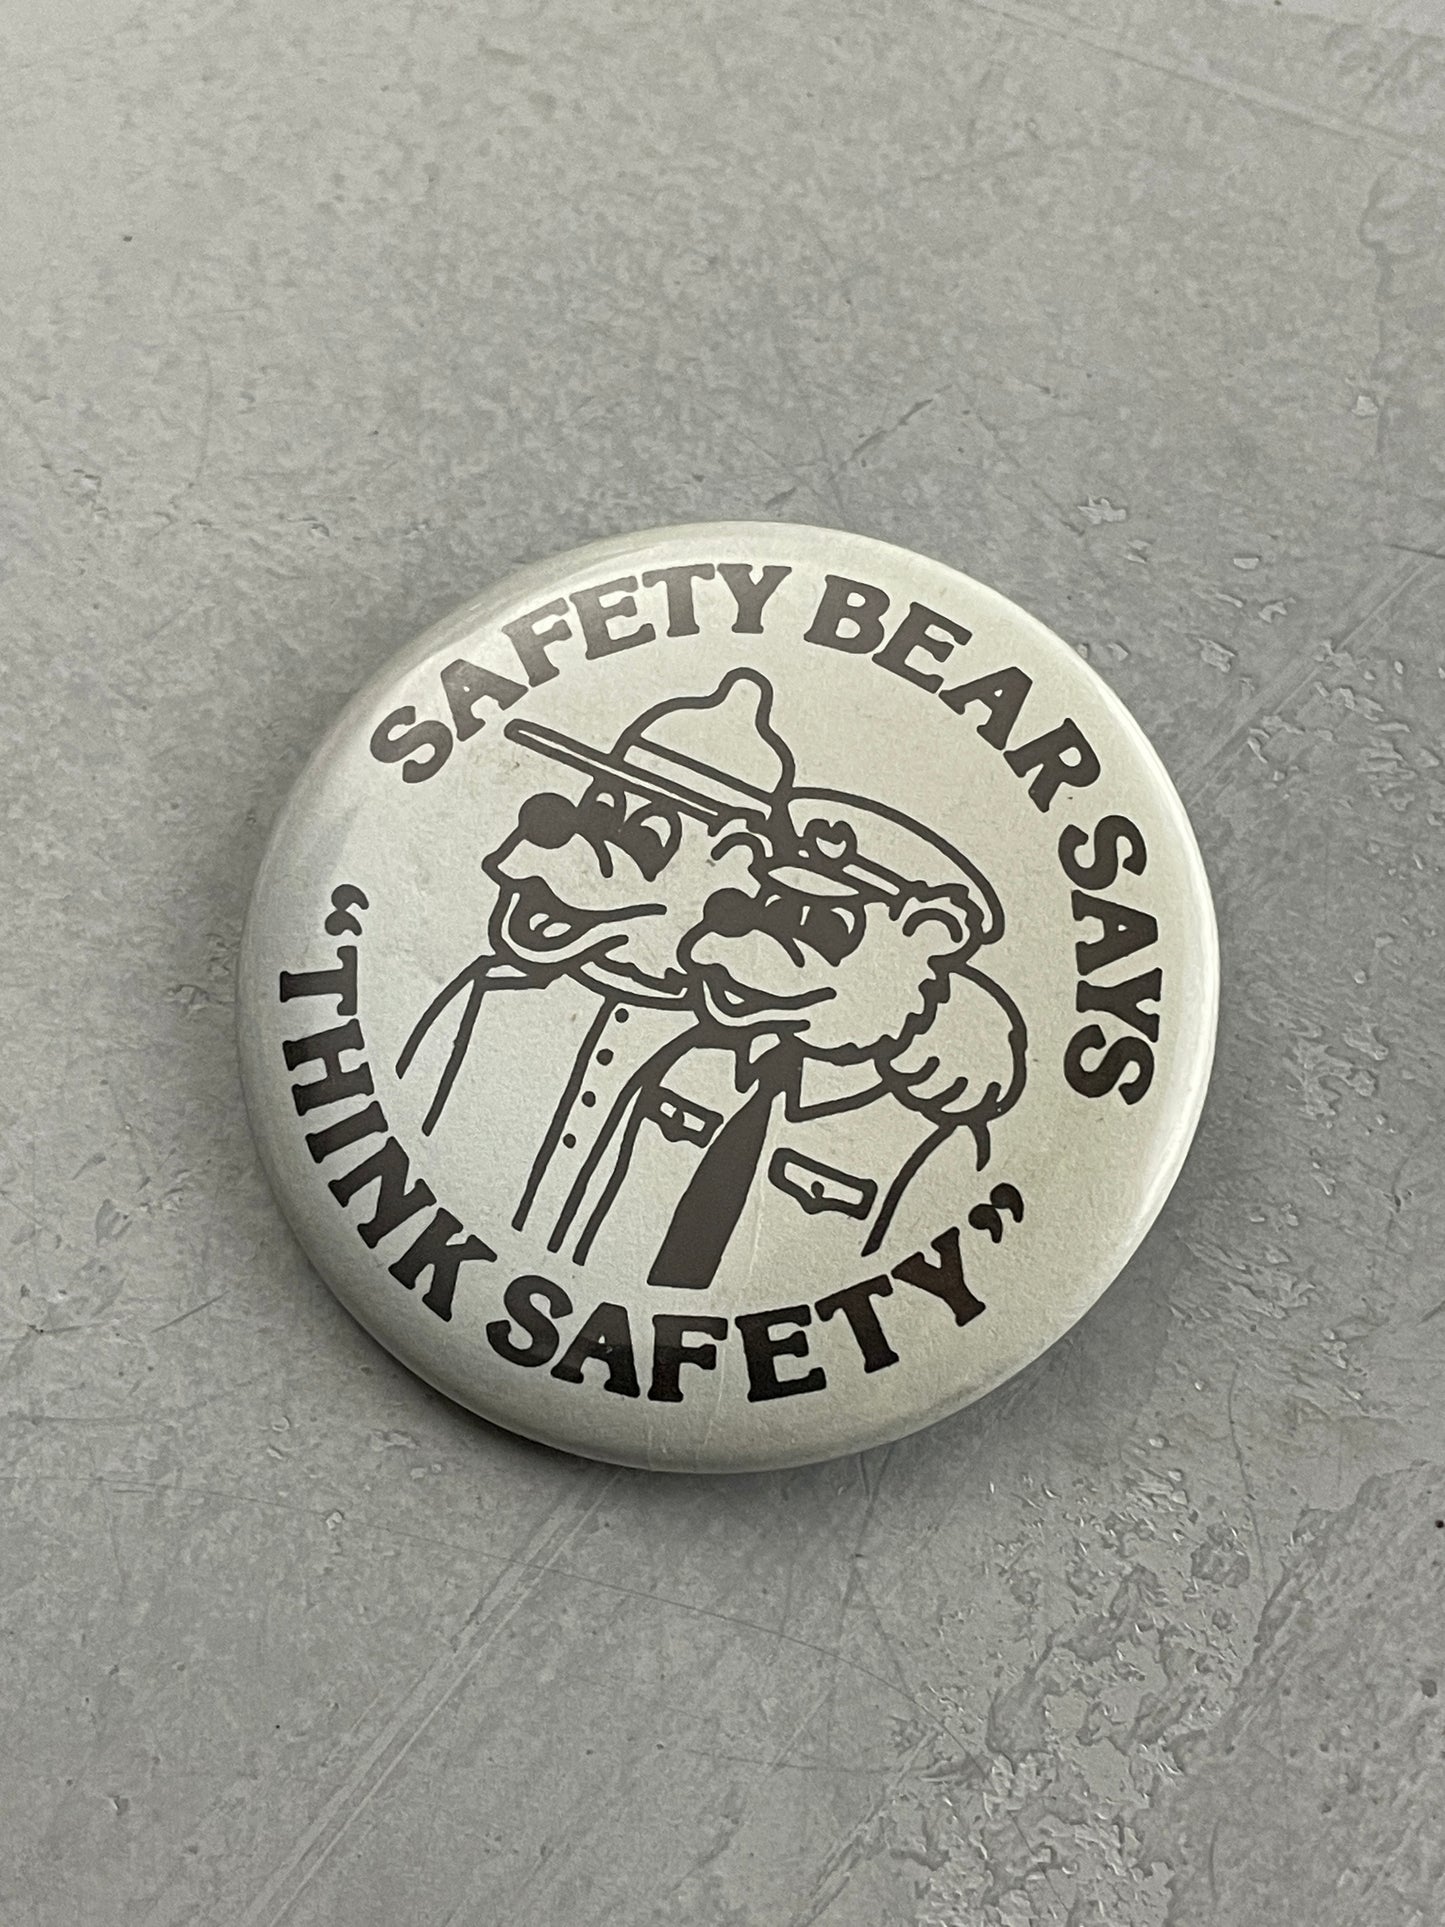 "Think Safety" Badge